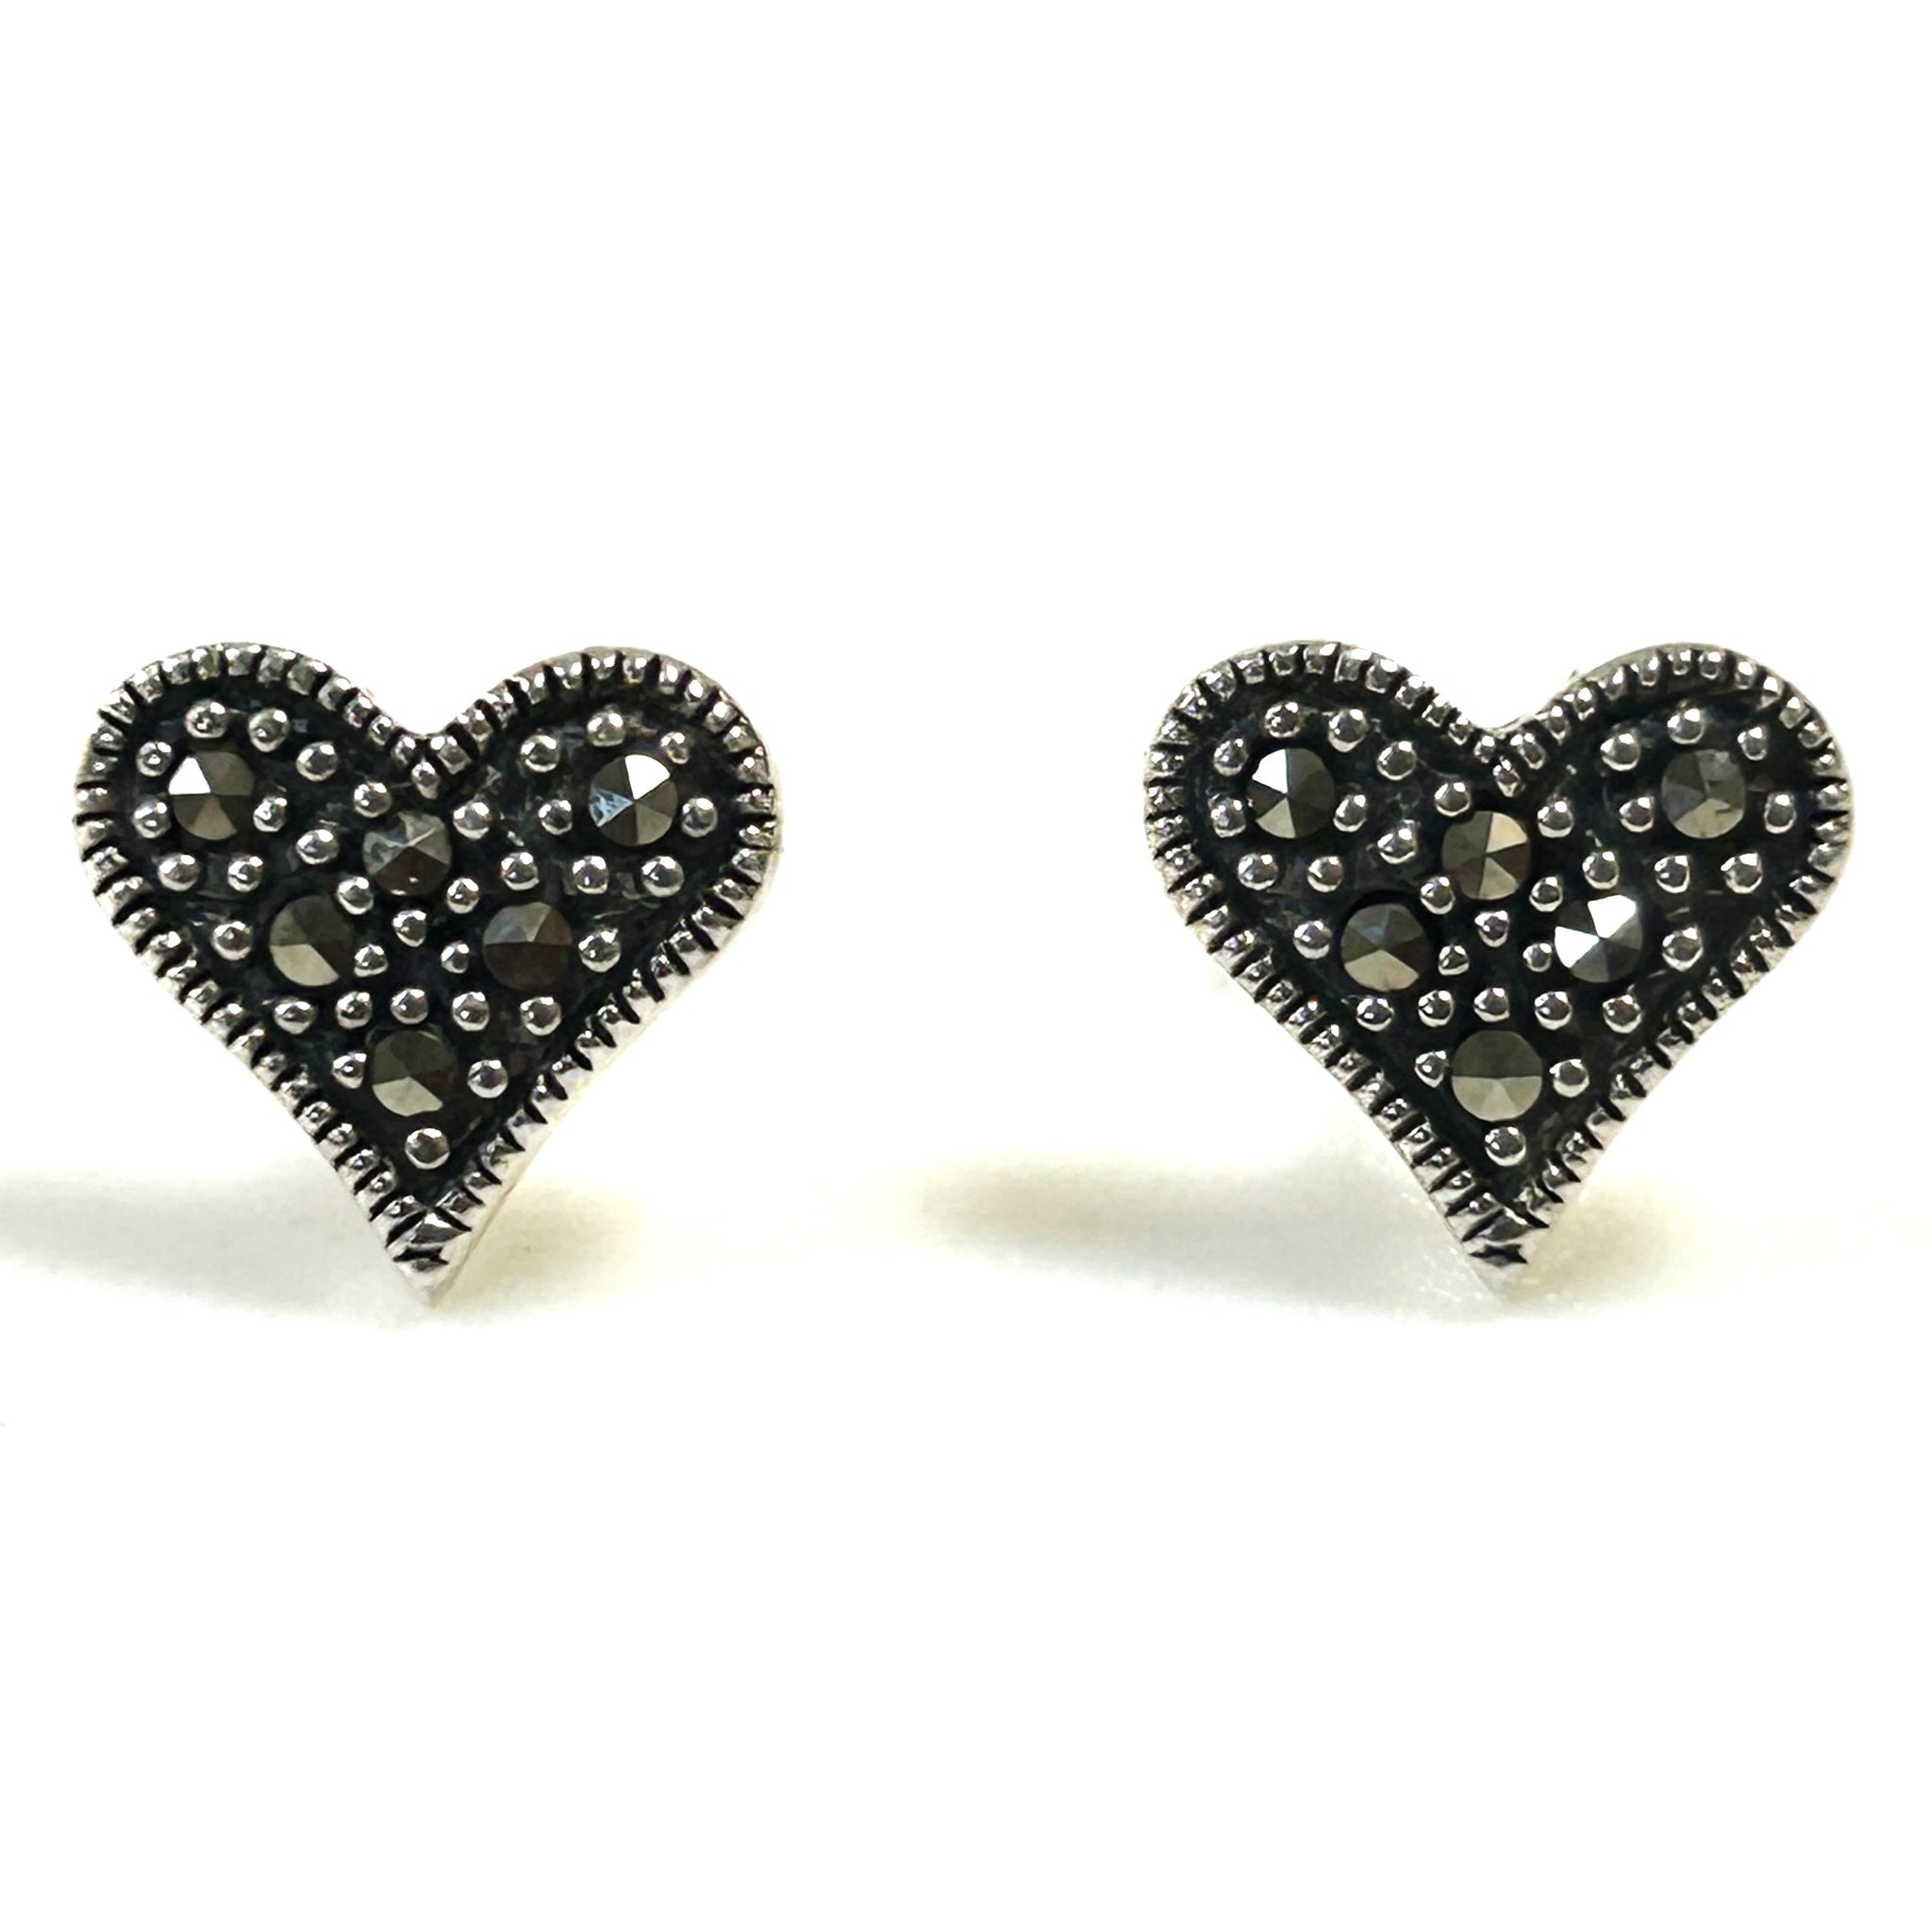 Small Silver and Marcasite “Heart” Stud Earrings